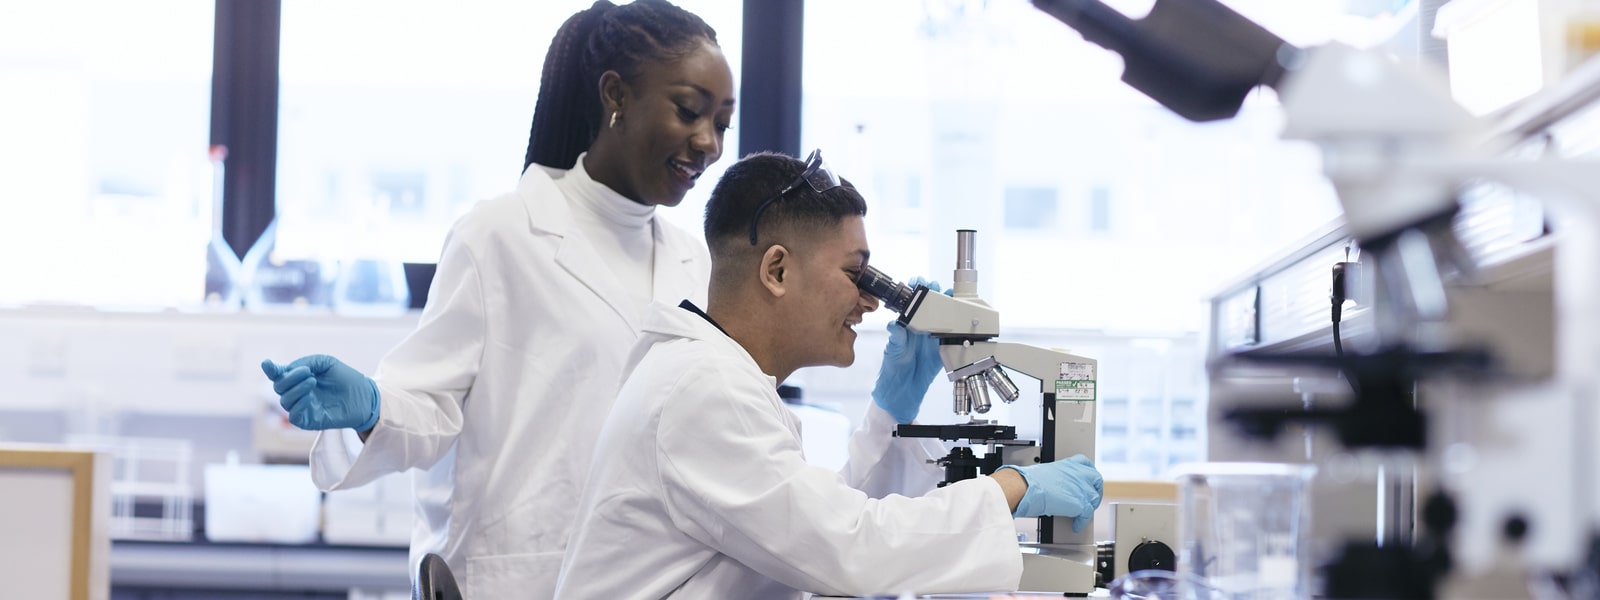 Students working in the Joseph Banks Laboratories